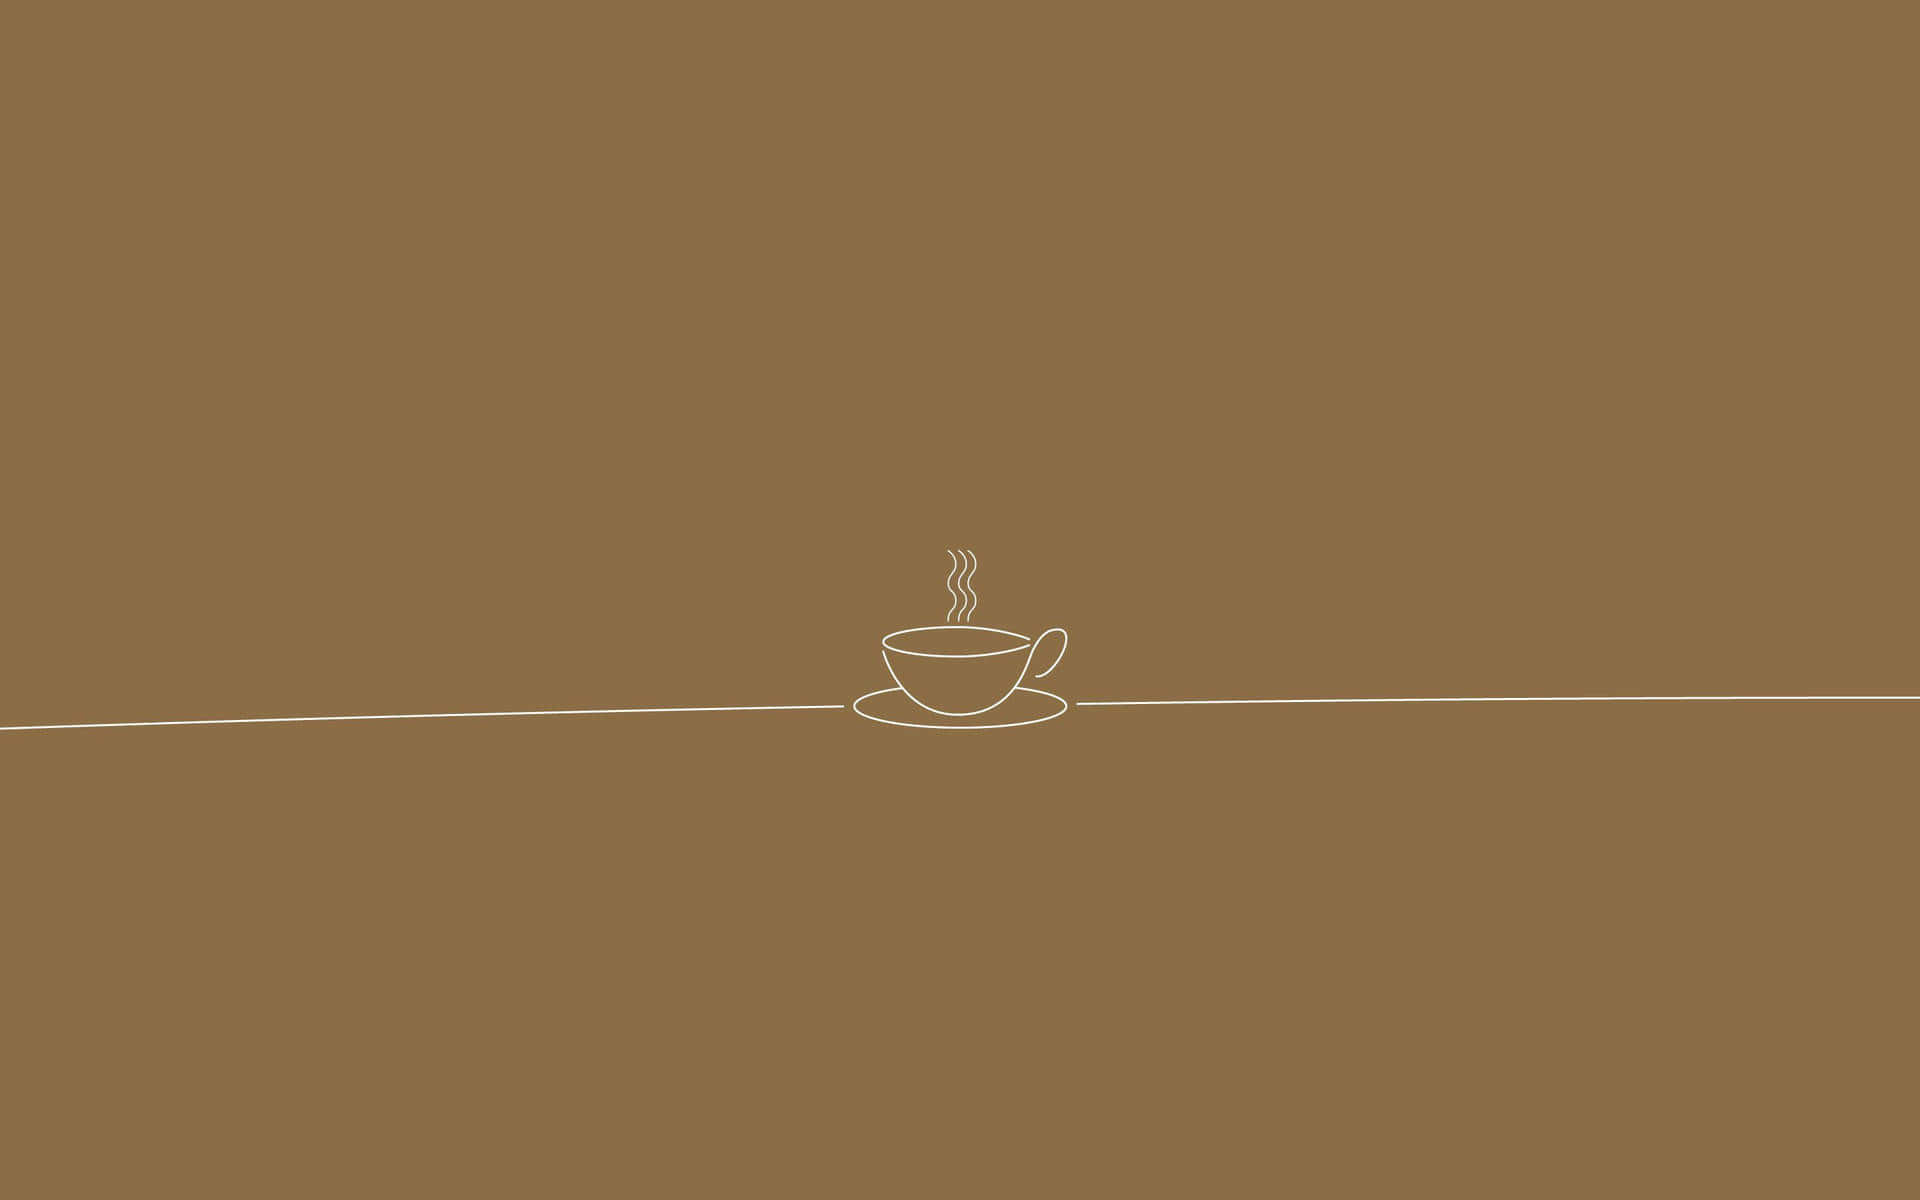 Download A Coffee Cup On A Brown Background | Wallpapers.com